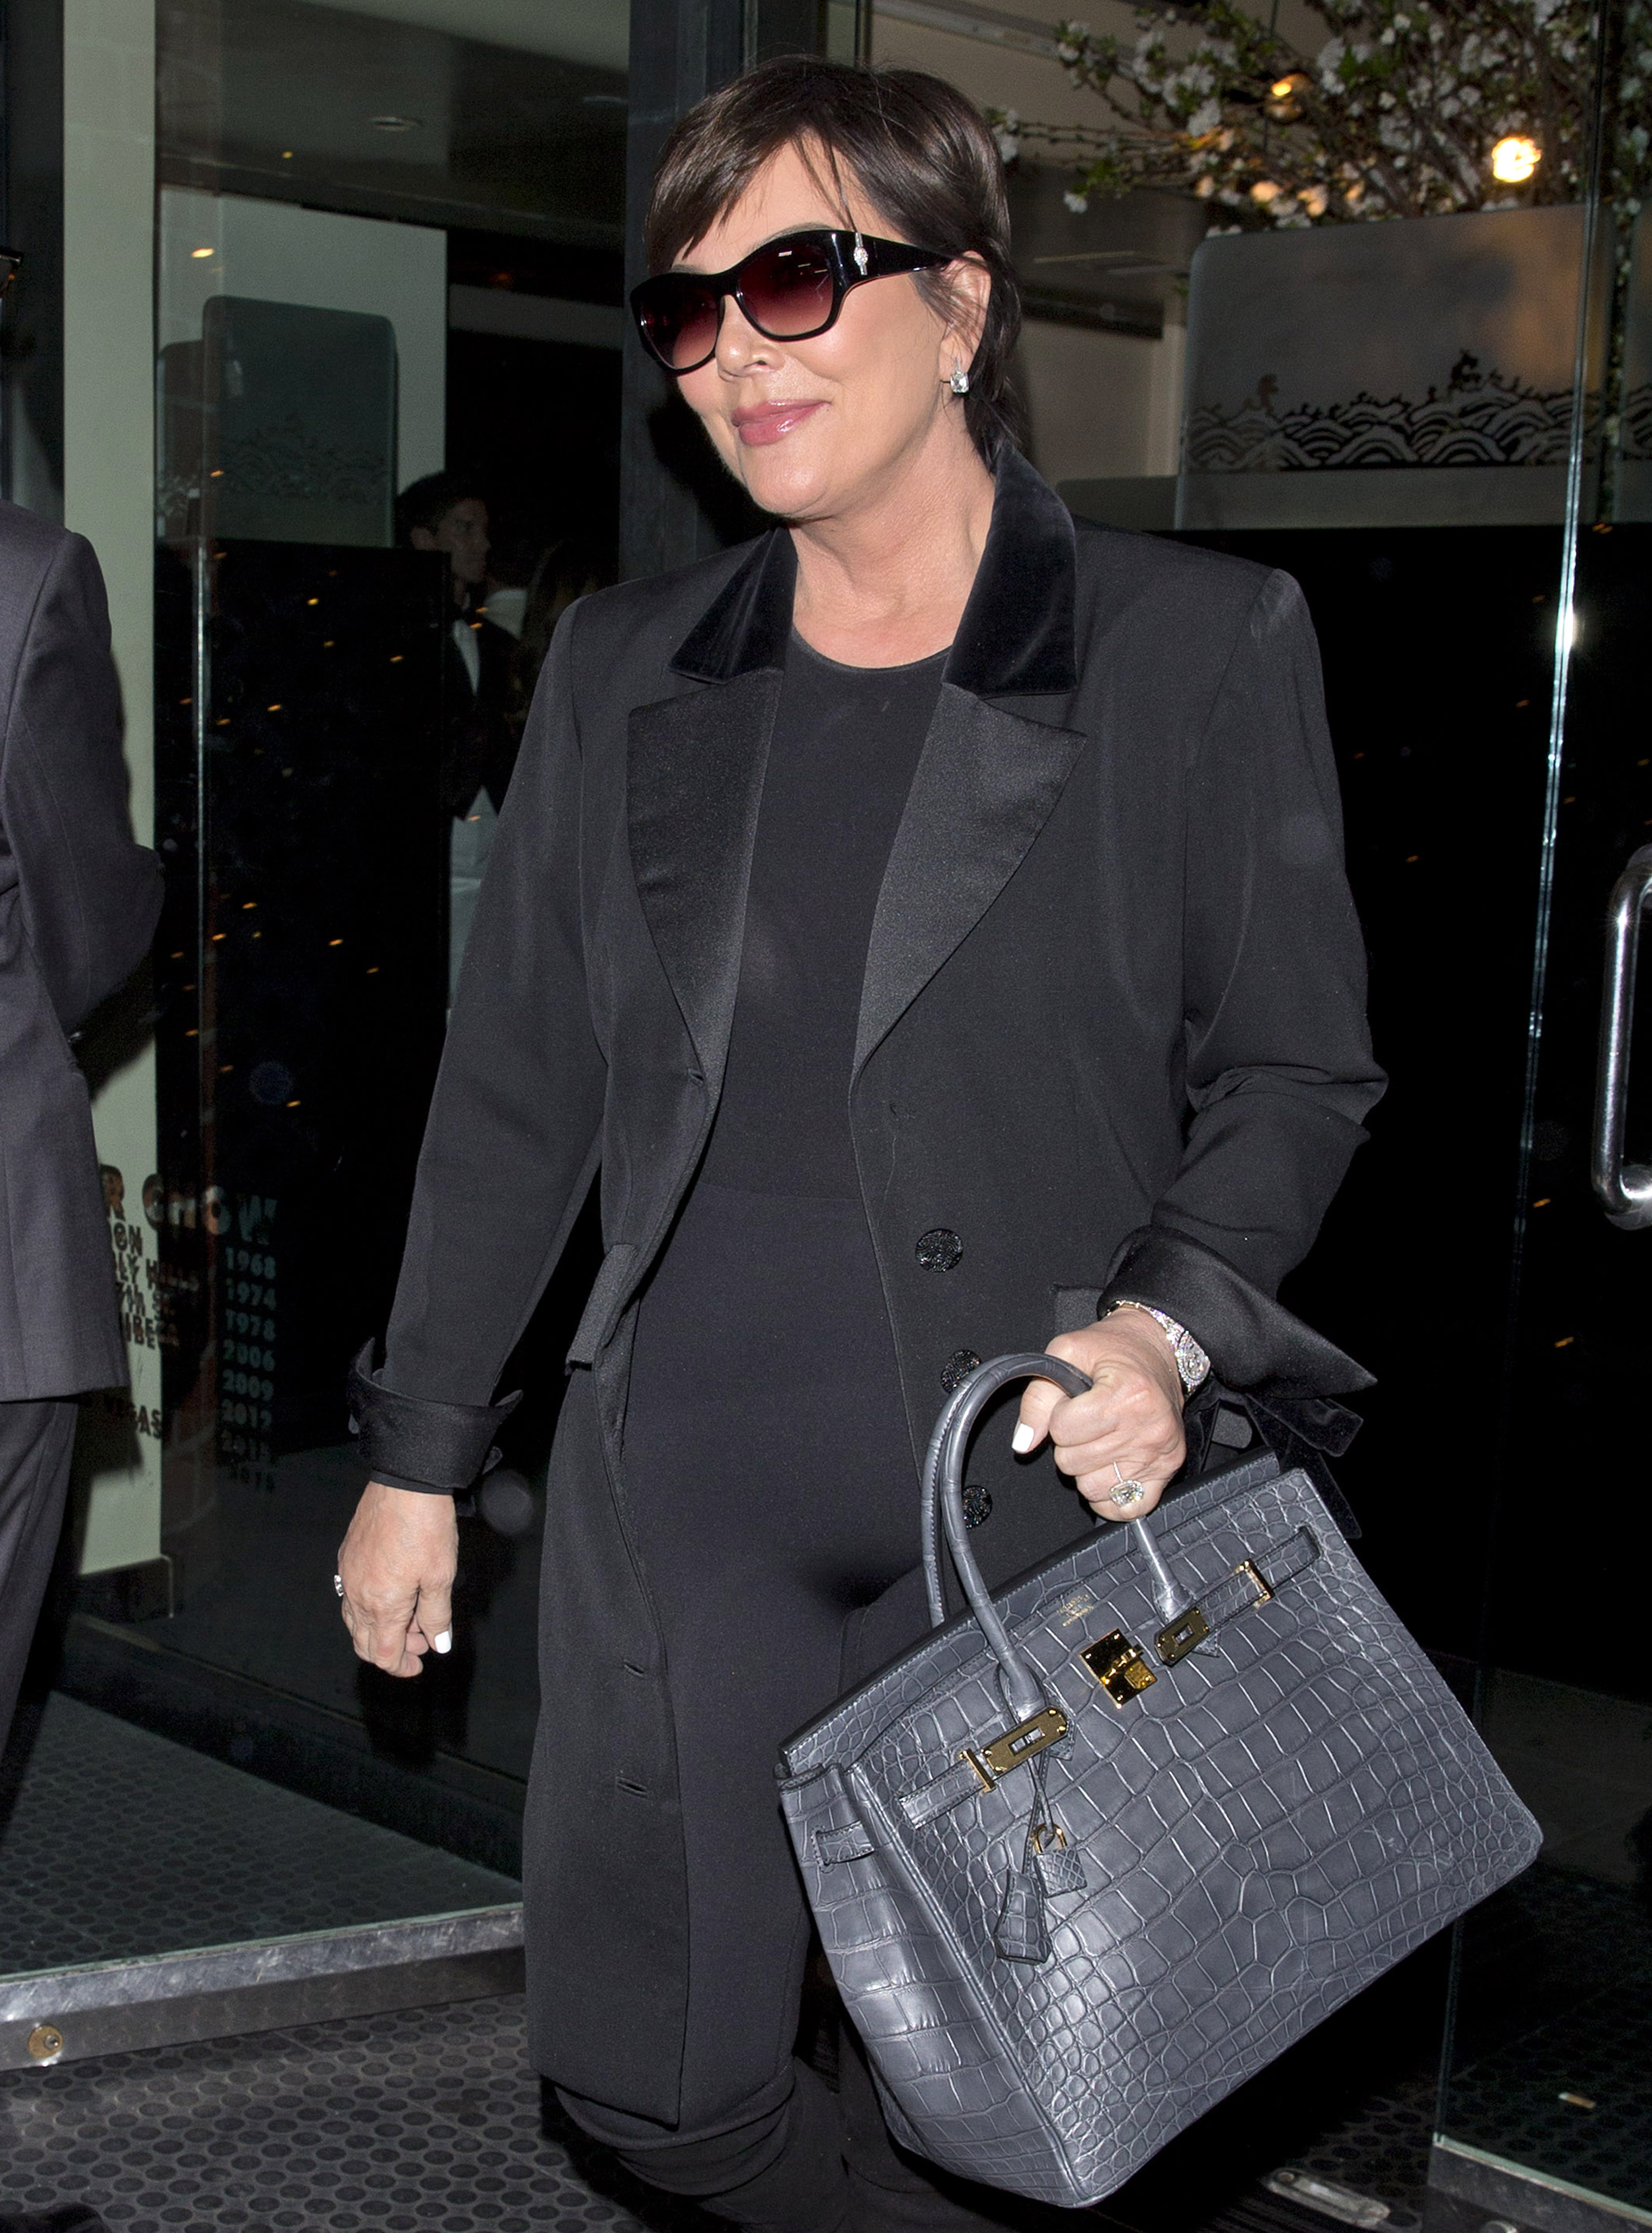 Kris Jenner Shows Off Curves In Chic Black Outfit See The Pics 